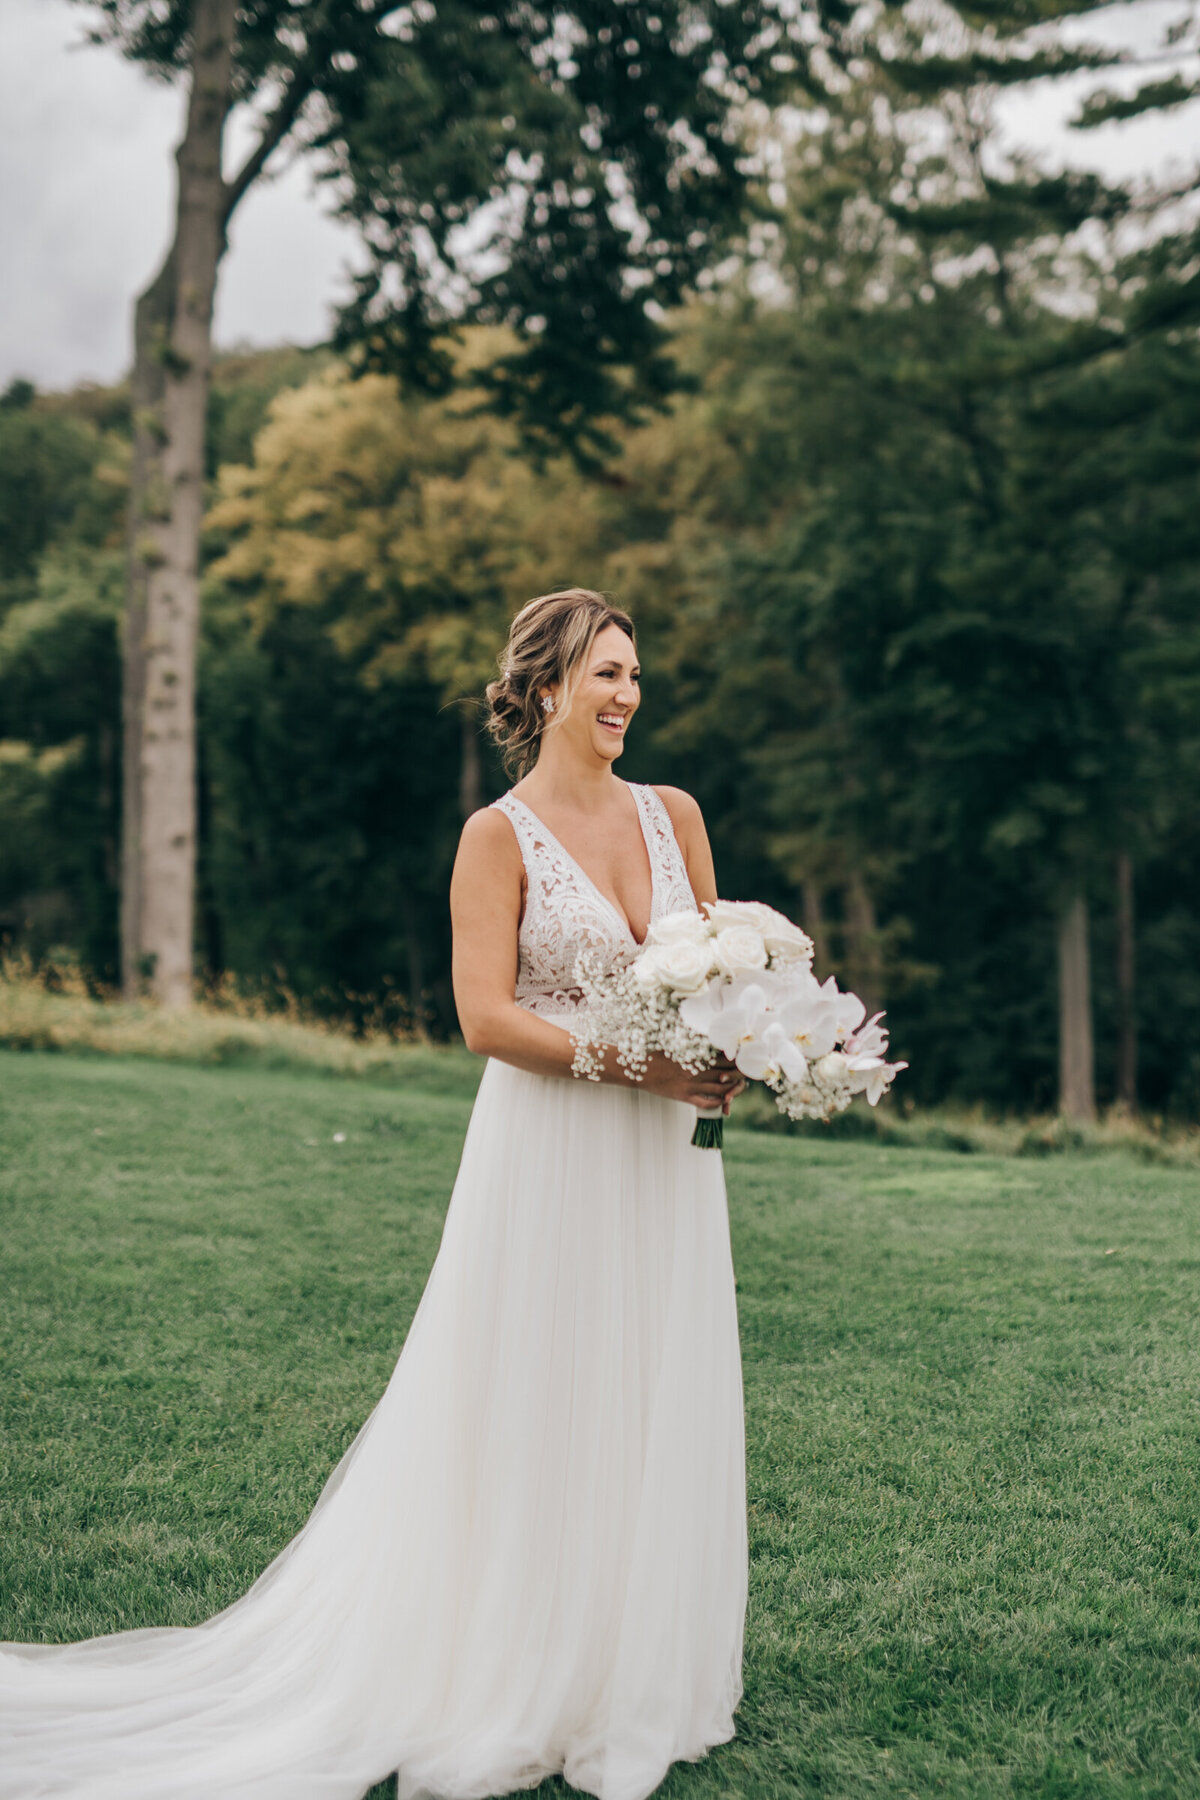 Bride posing for traditional photos with an elegant white wedding bouquet